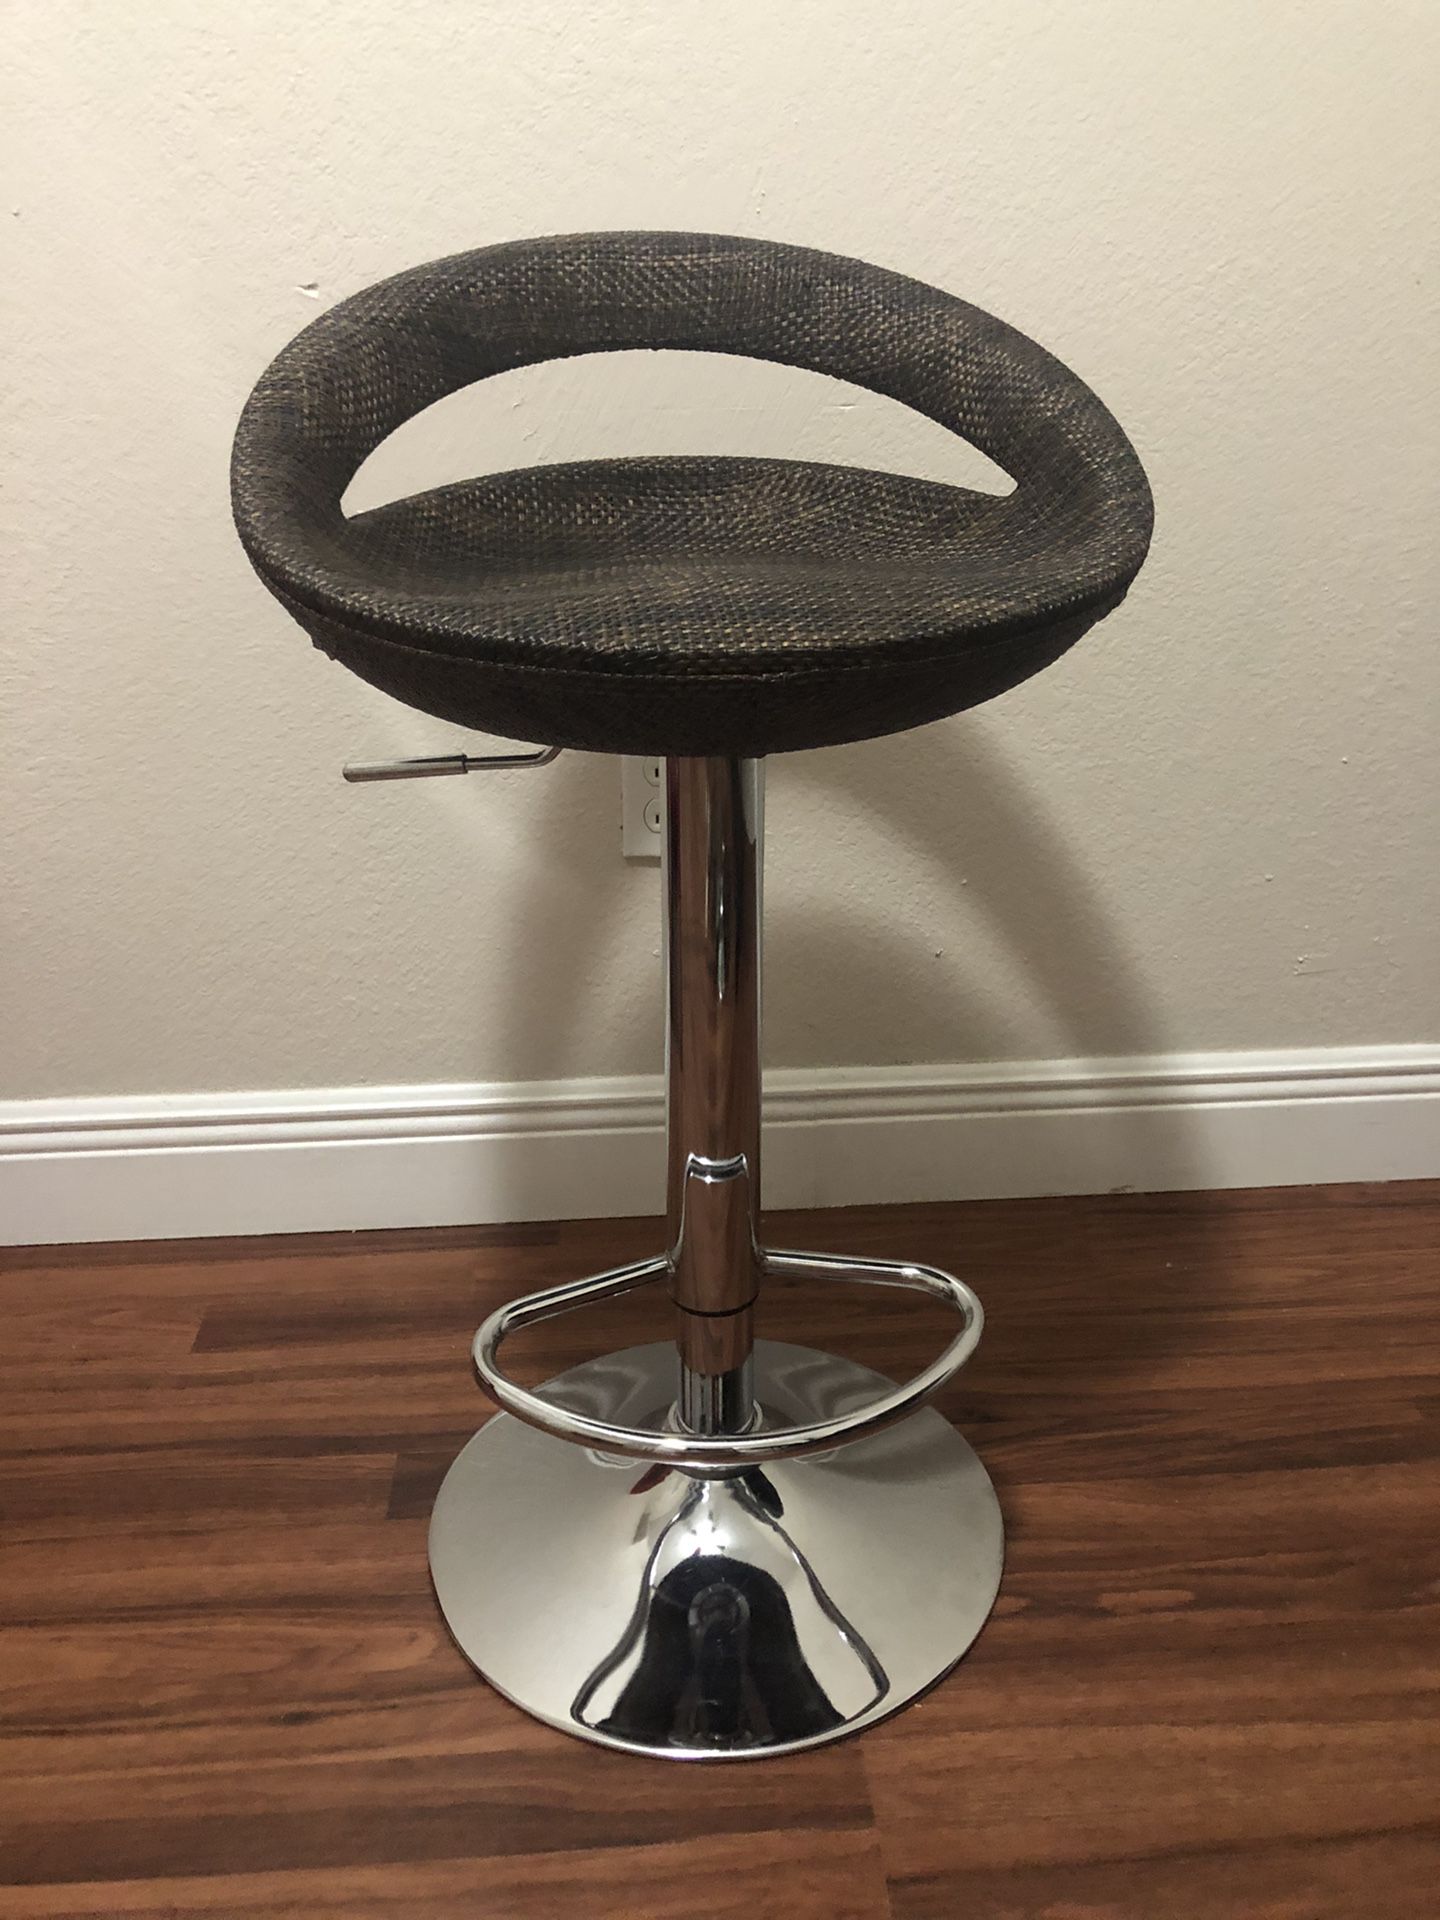 Adjustable counter/bar stools - 6 available!